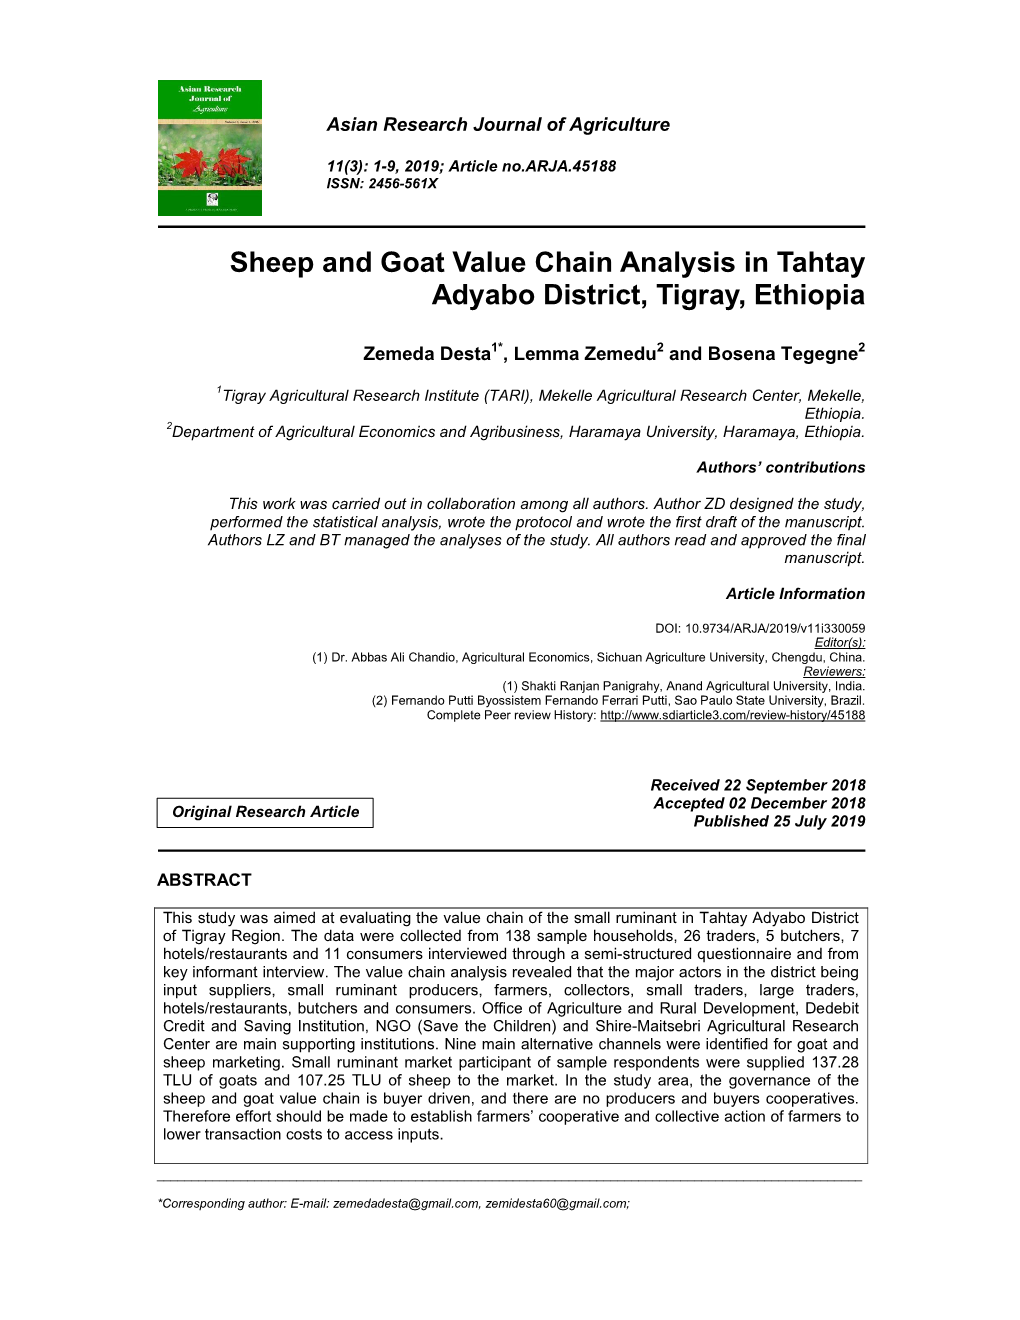 Sheep and Goat Value Chain Analysis in Tahtay Adyabo District, Tigray, Ethiopia